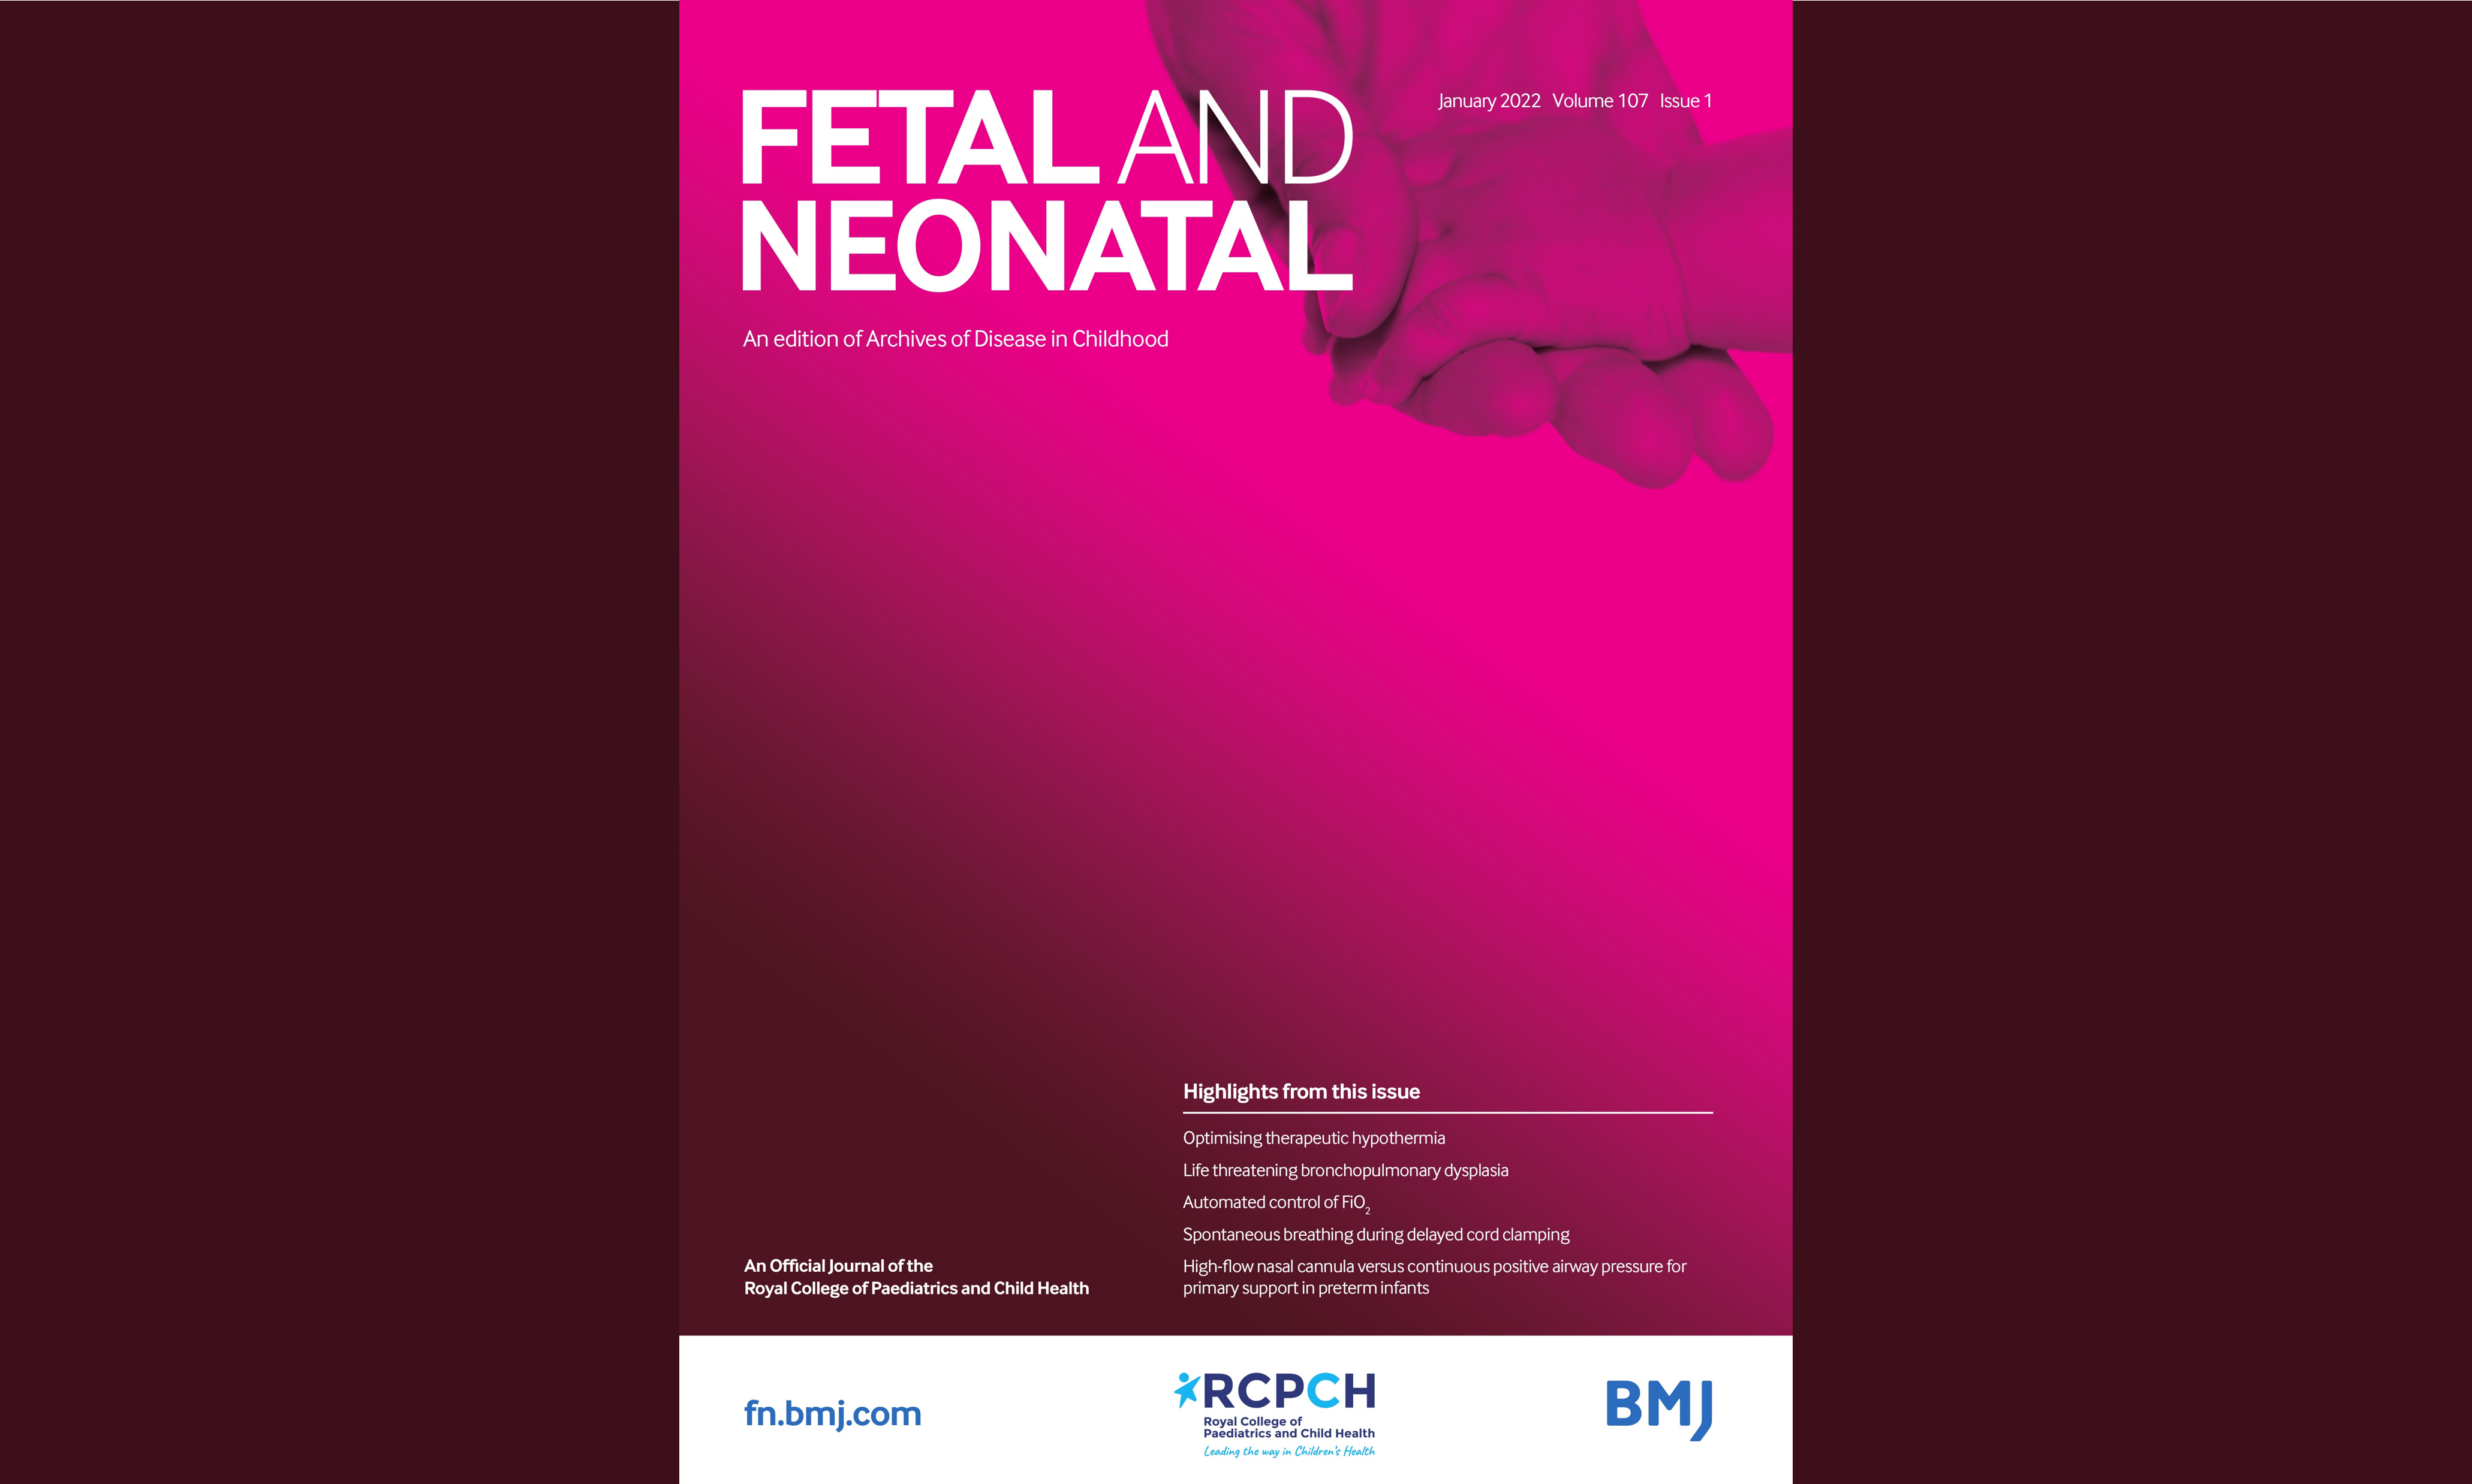 Economic evaluation of computerised interpretation of fetal heart rate during labour: a cost-consequence analysis alongside the INFANT study.